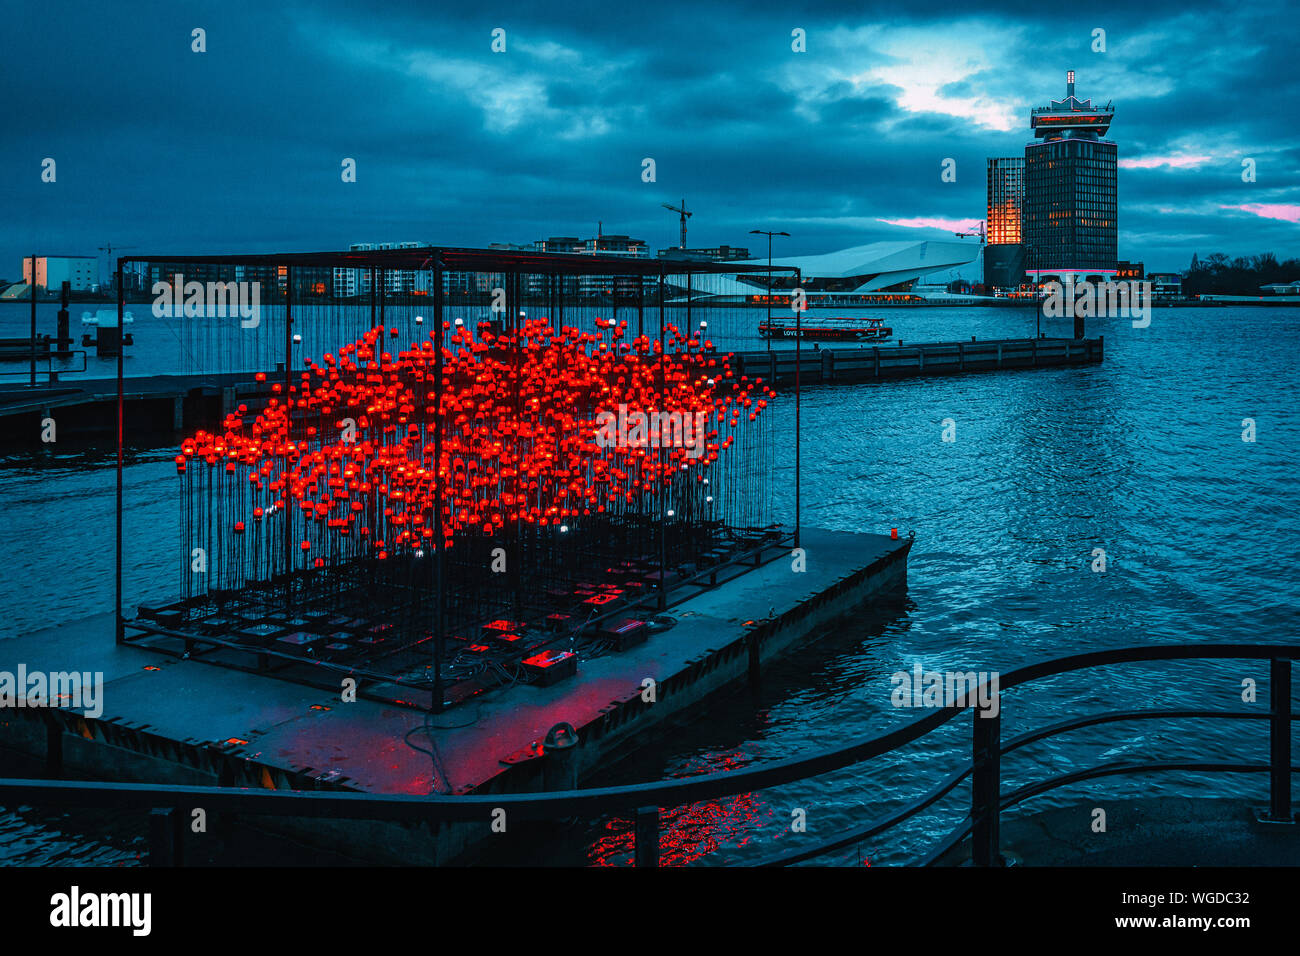 Amsterdam, Netherlands - January 14, 2019: Light Festival Amsterdam, floating red light object on the IJ river in Amsterdam with the Eye Film Museum a Stock Photo